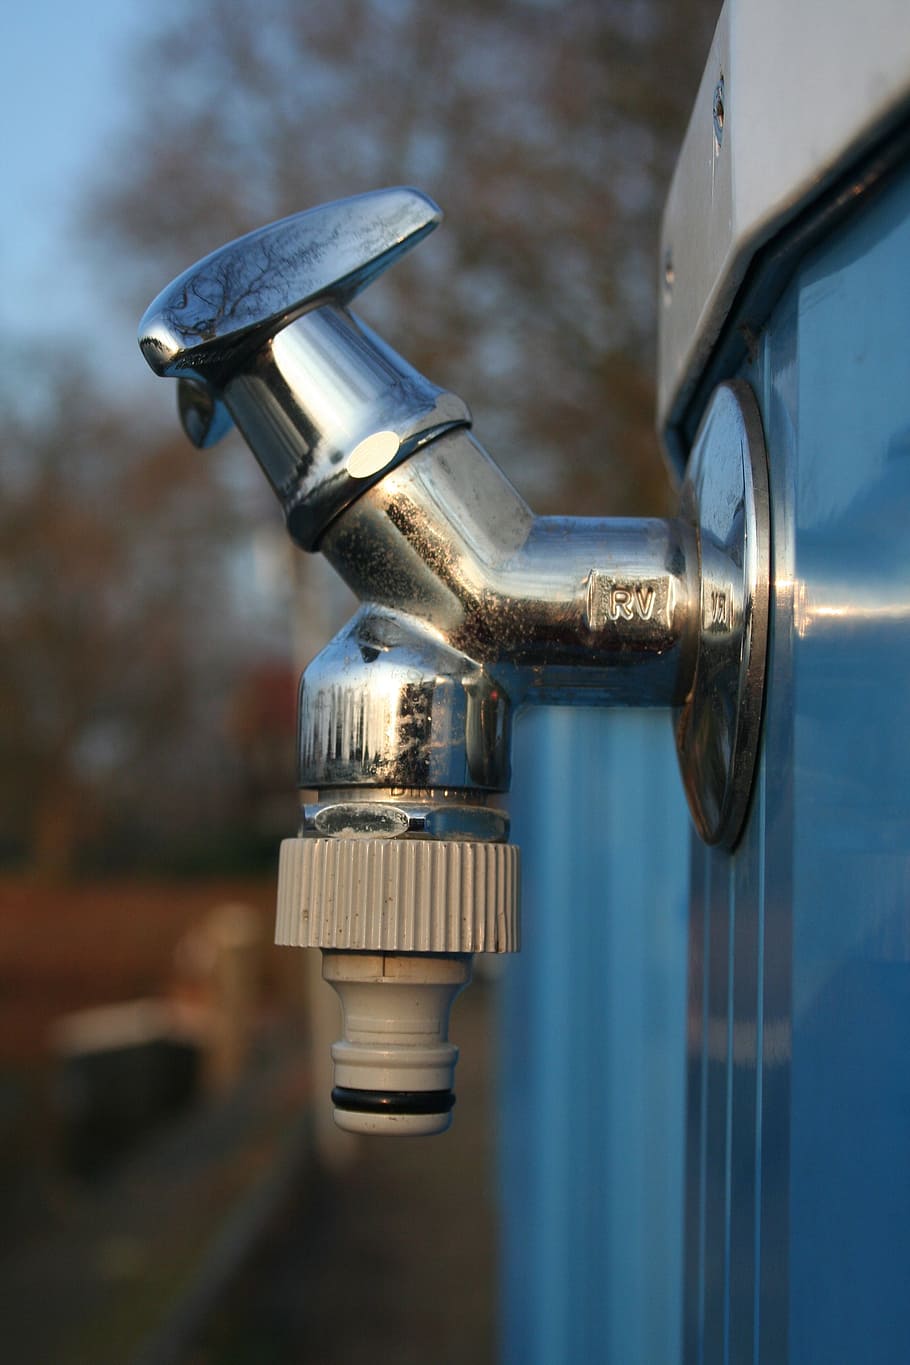 faucet, water, ship, water tap, metal, close-up, focus on foreground, silver colored, day, outdoors